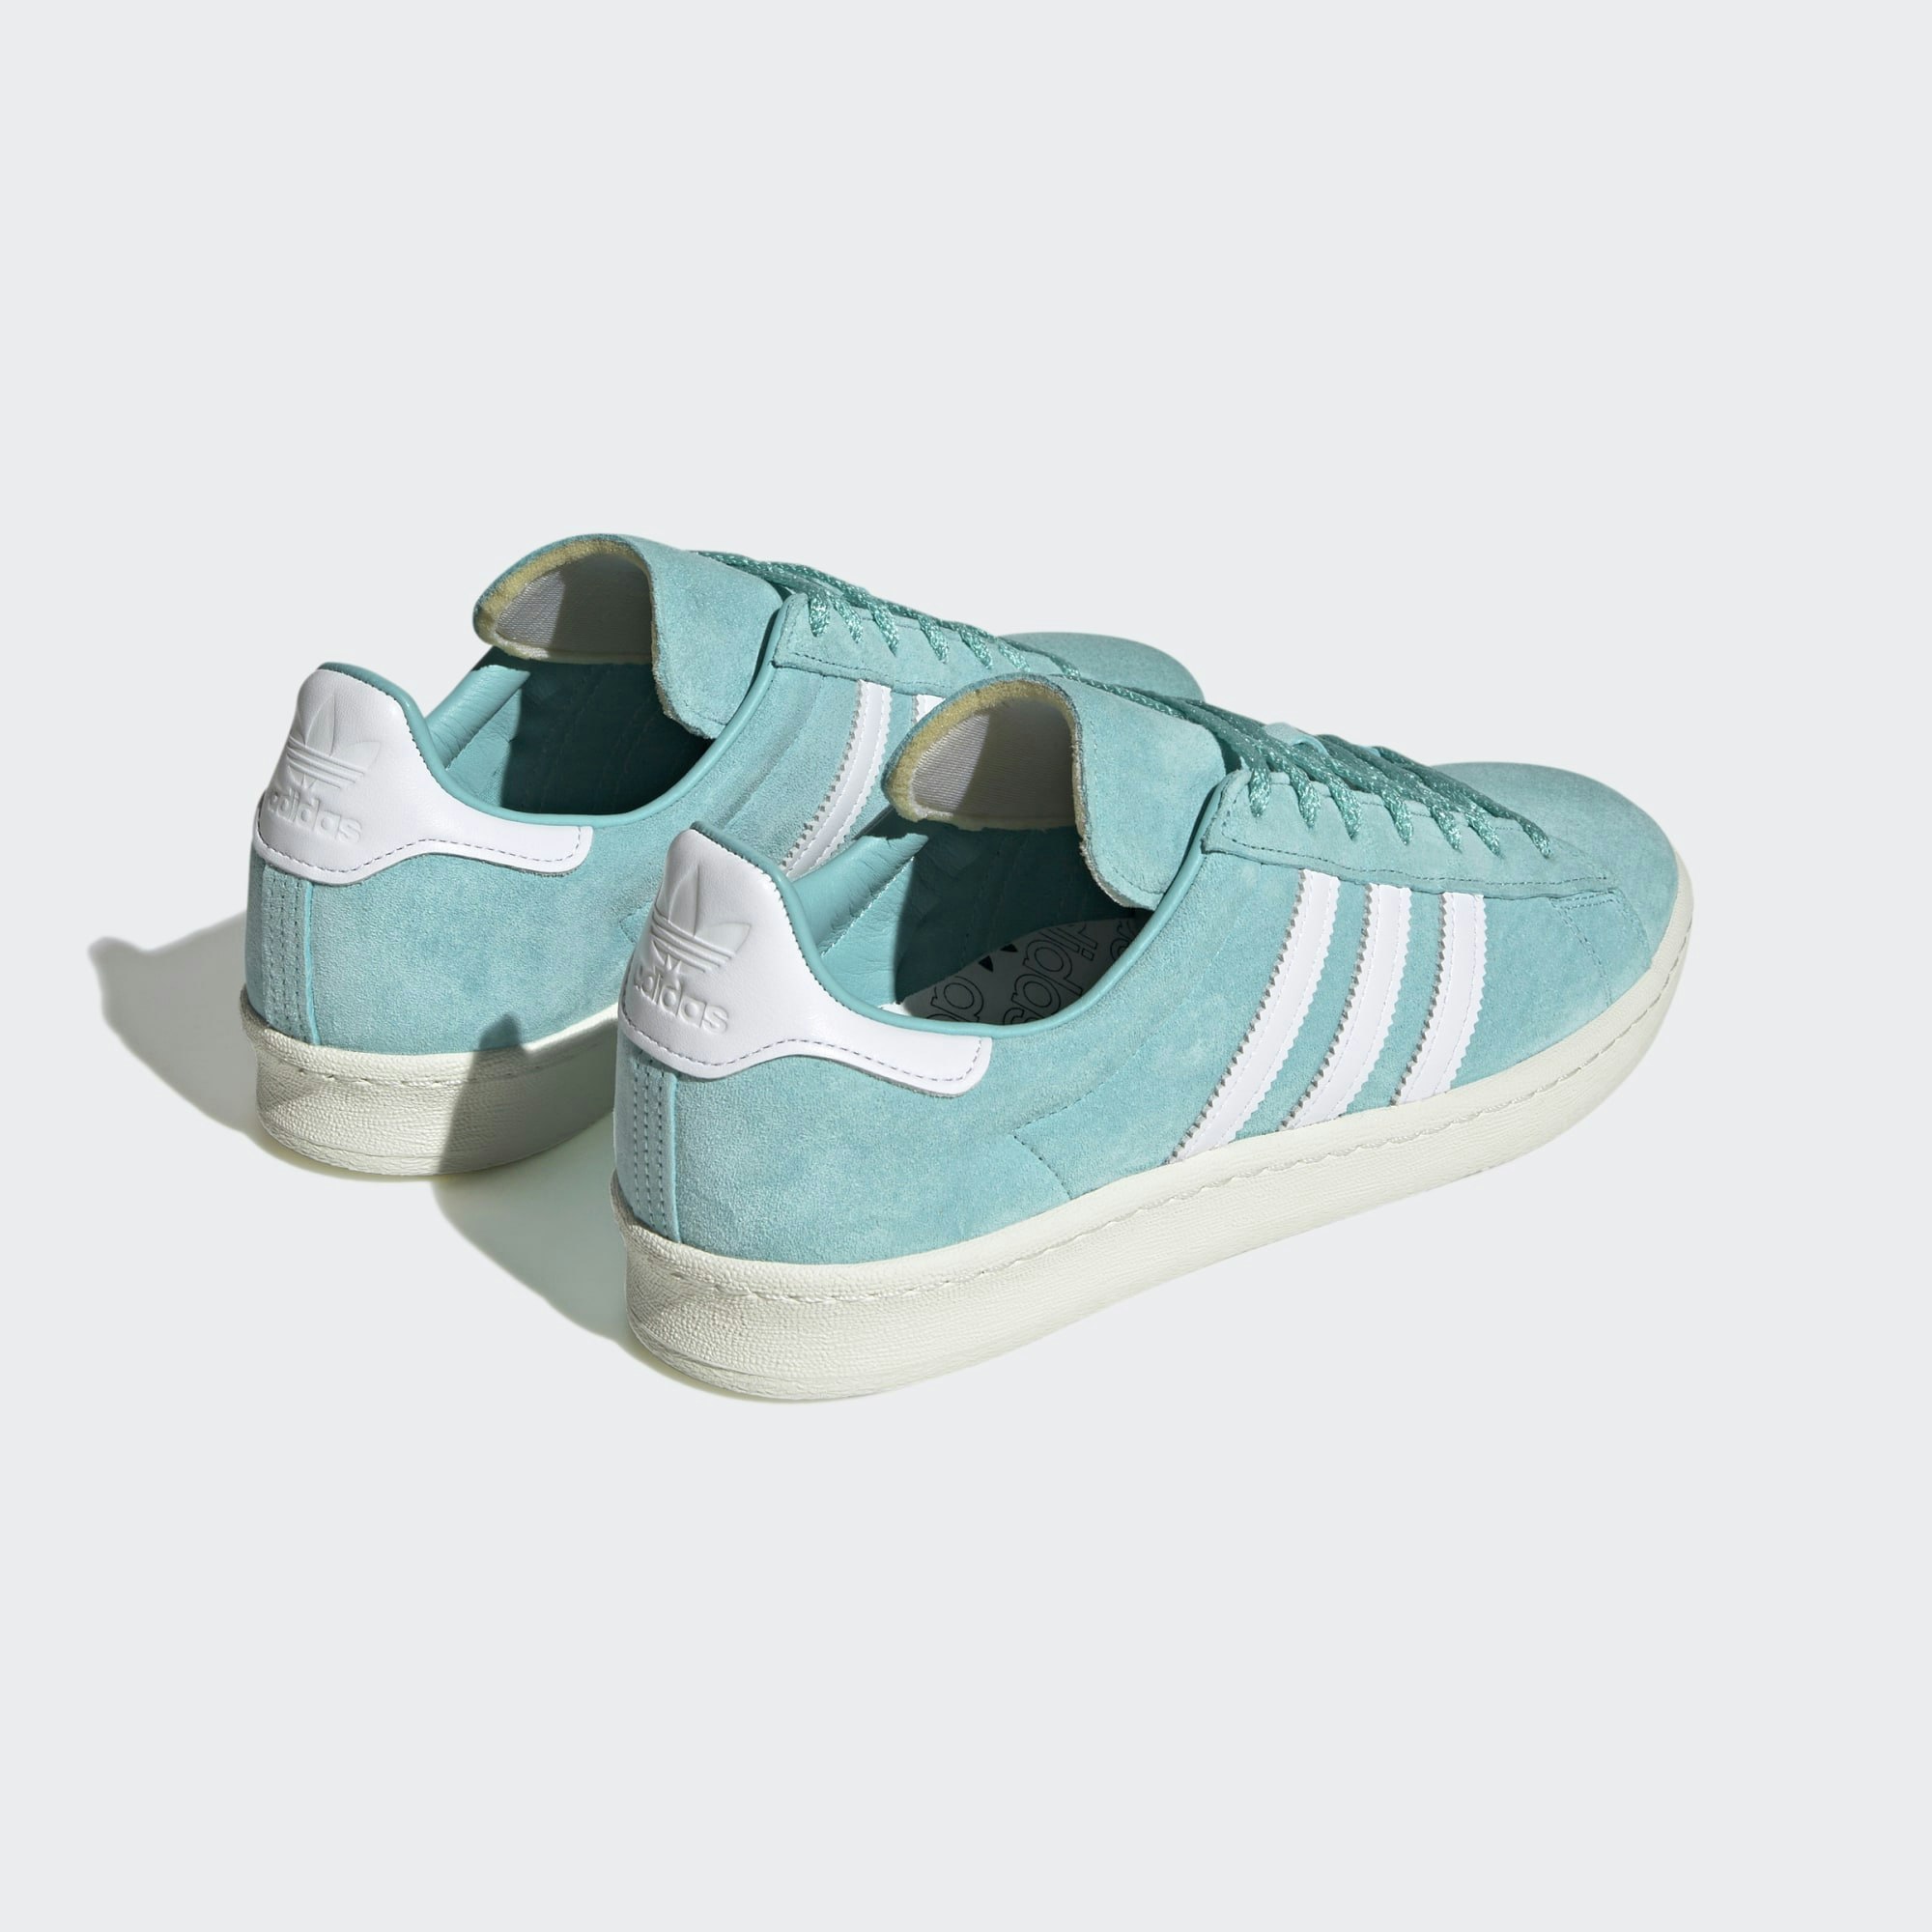 adidas Campus 80s "Easy Mint"